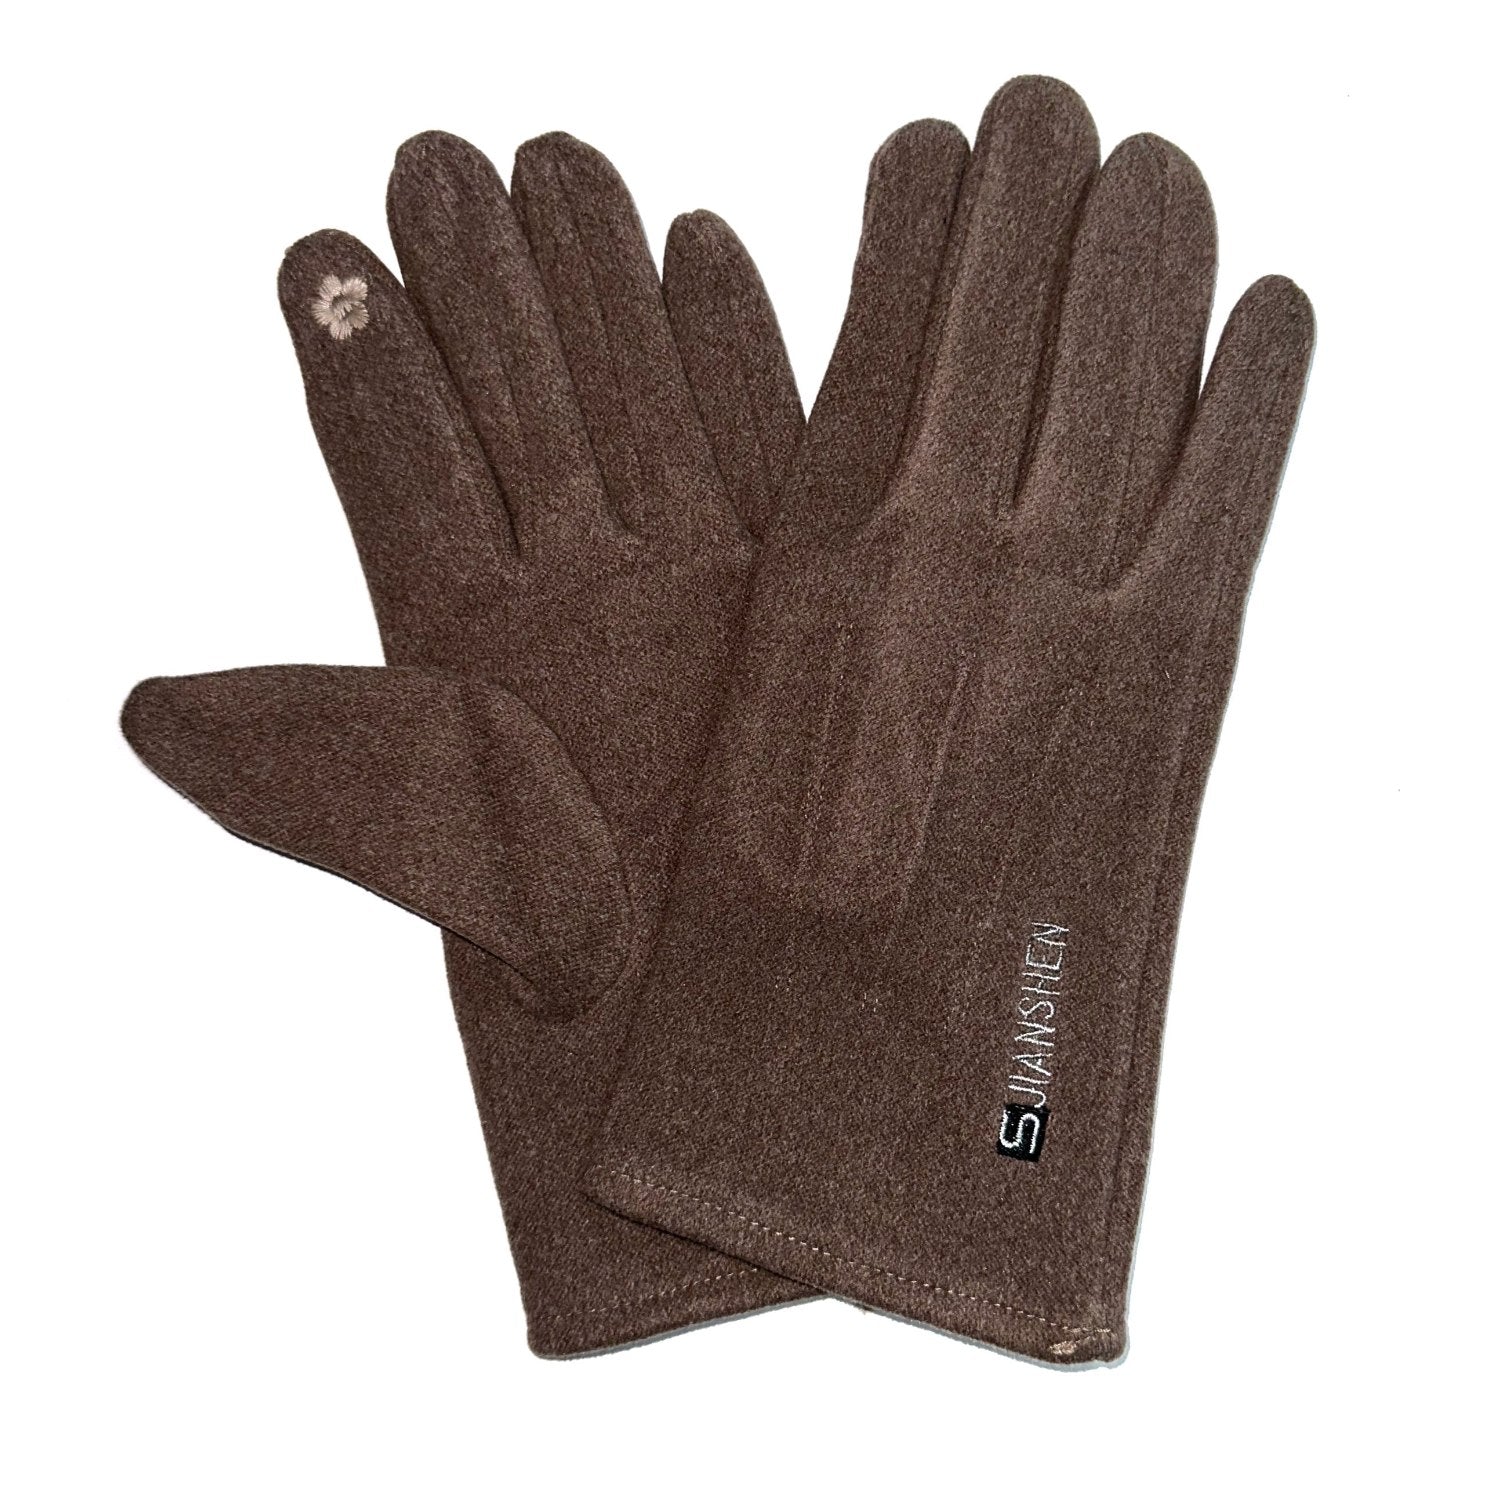 Buy Gokyo K2 Insulation Layering Gloves Brown | Cold Weather Gloves at Gokyo Outdoor Clothing & Gear